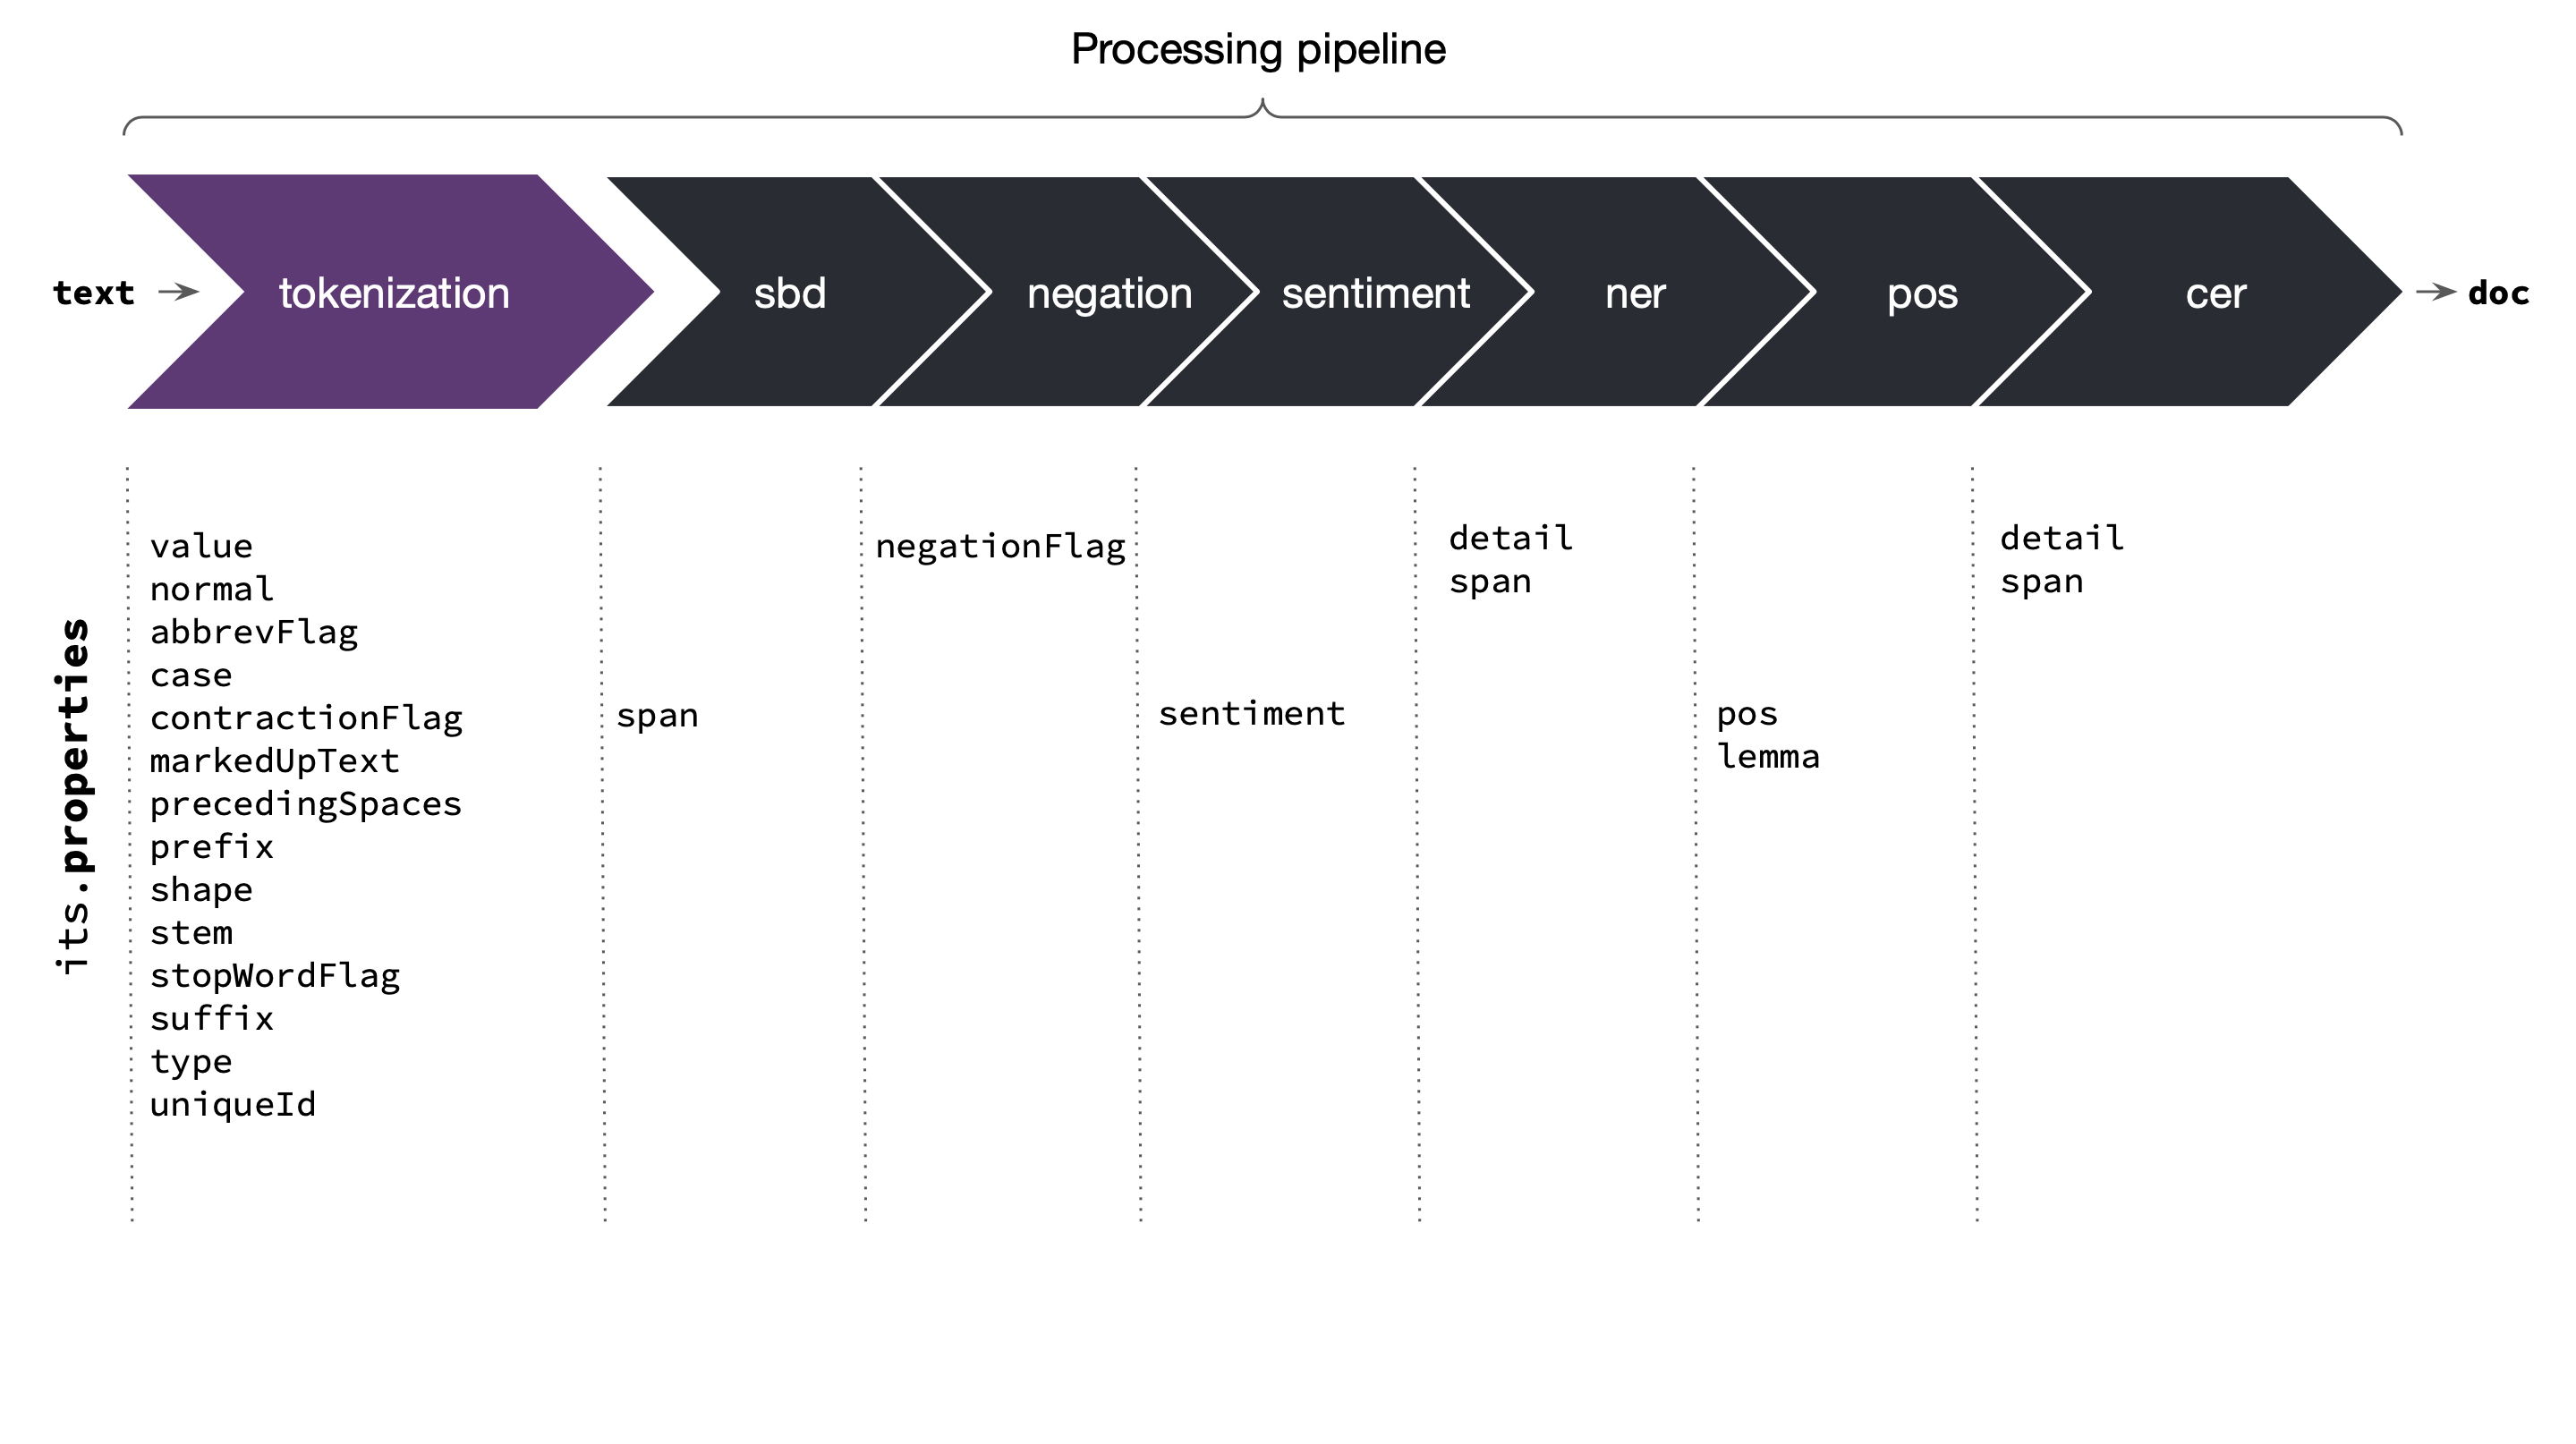 Diagram showing the processing pipeline of winkNLP